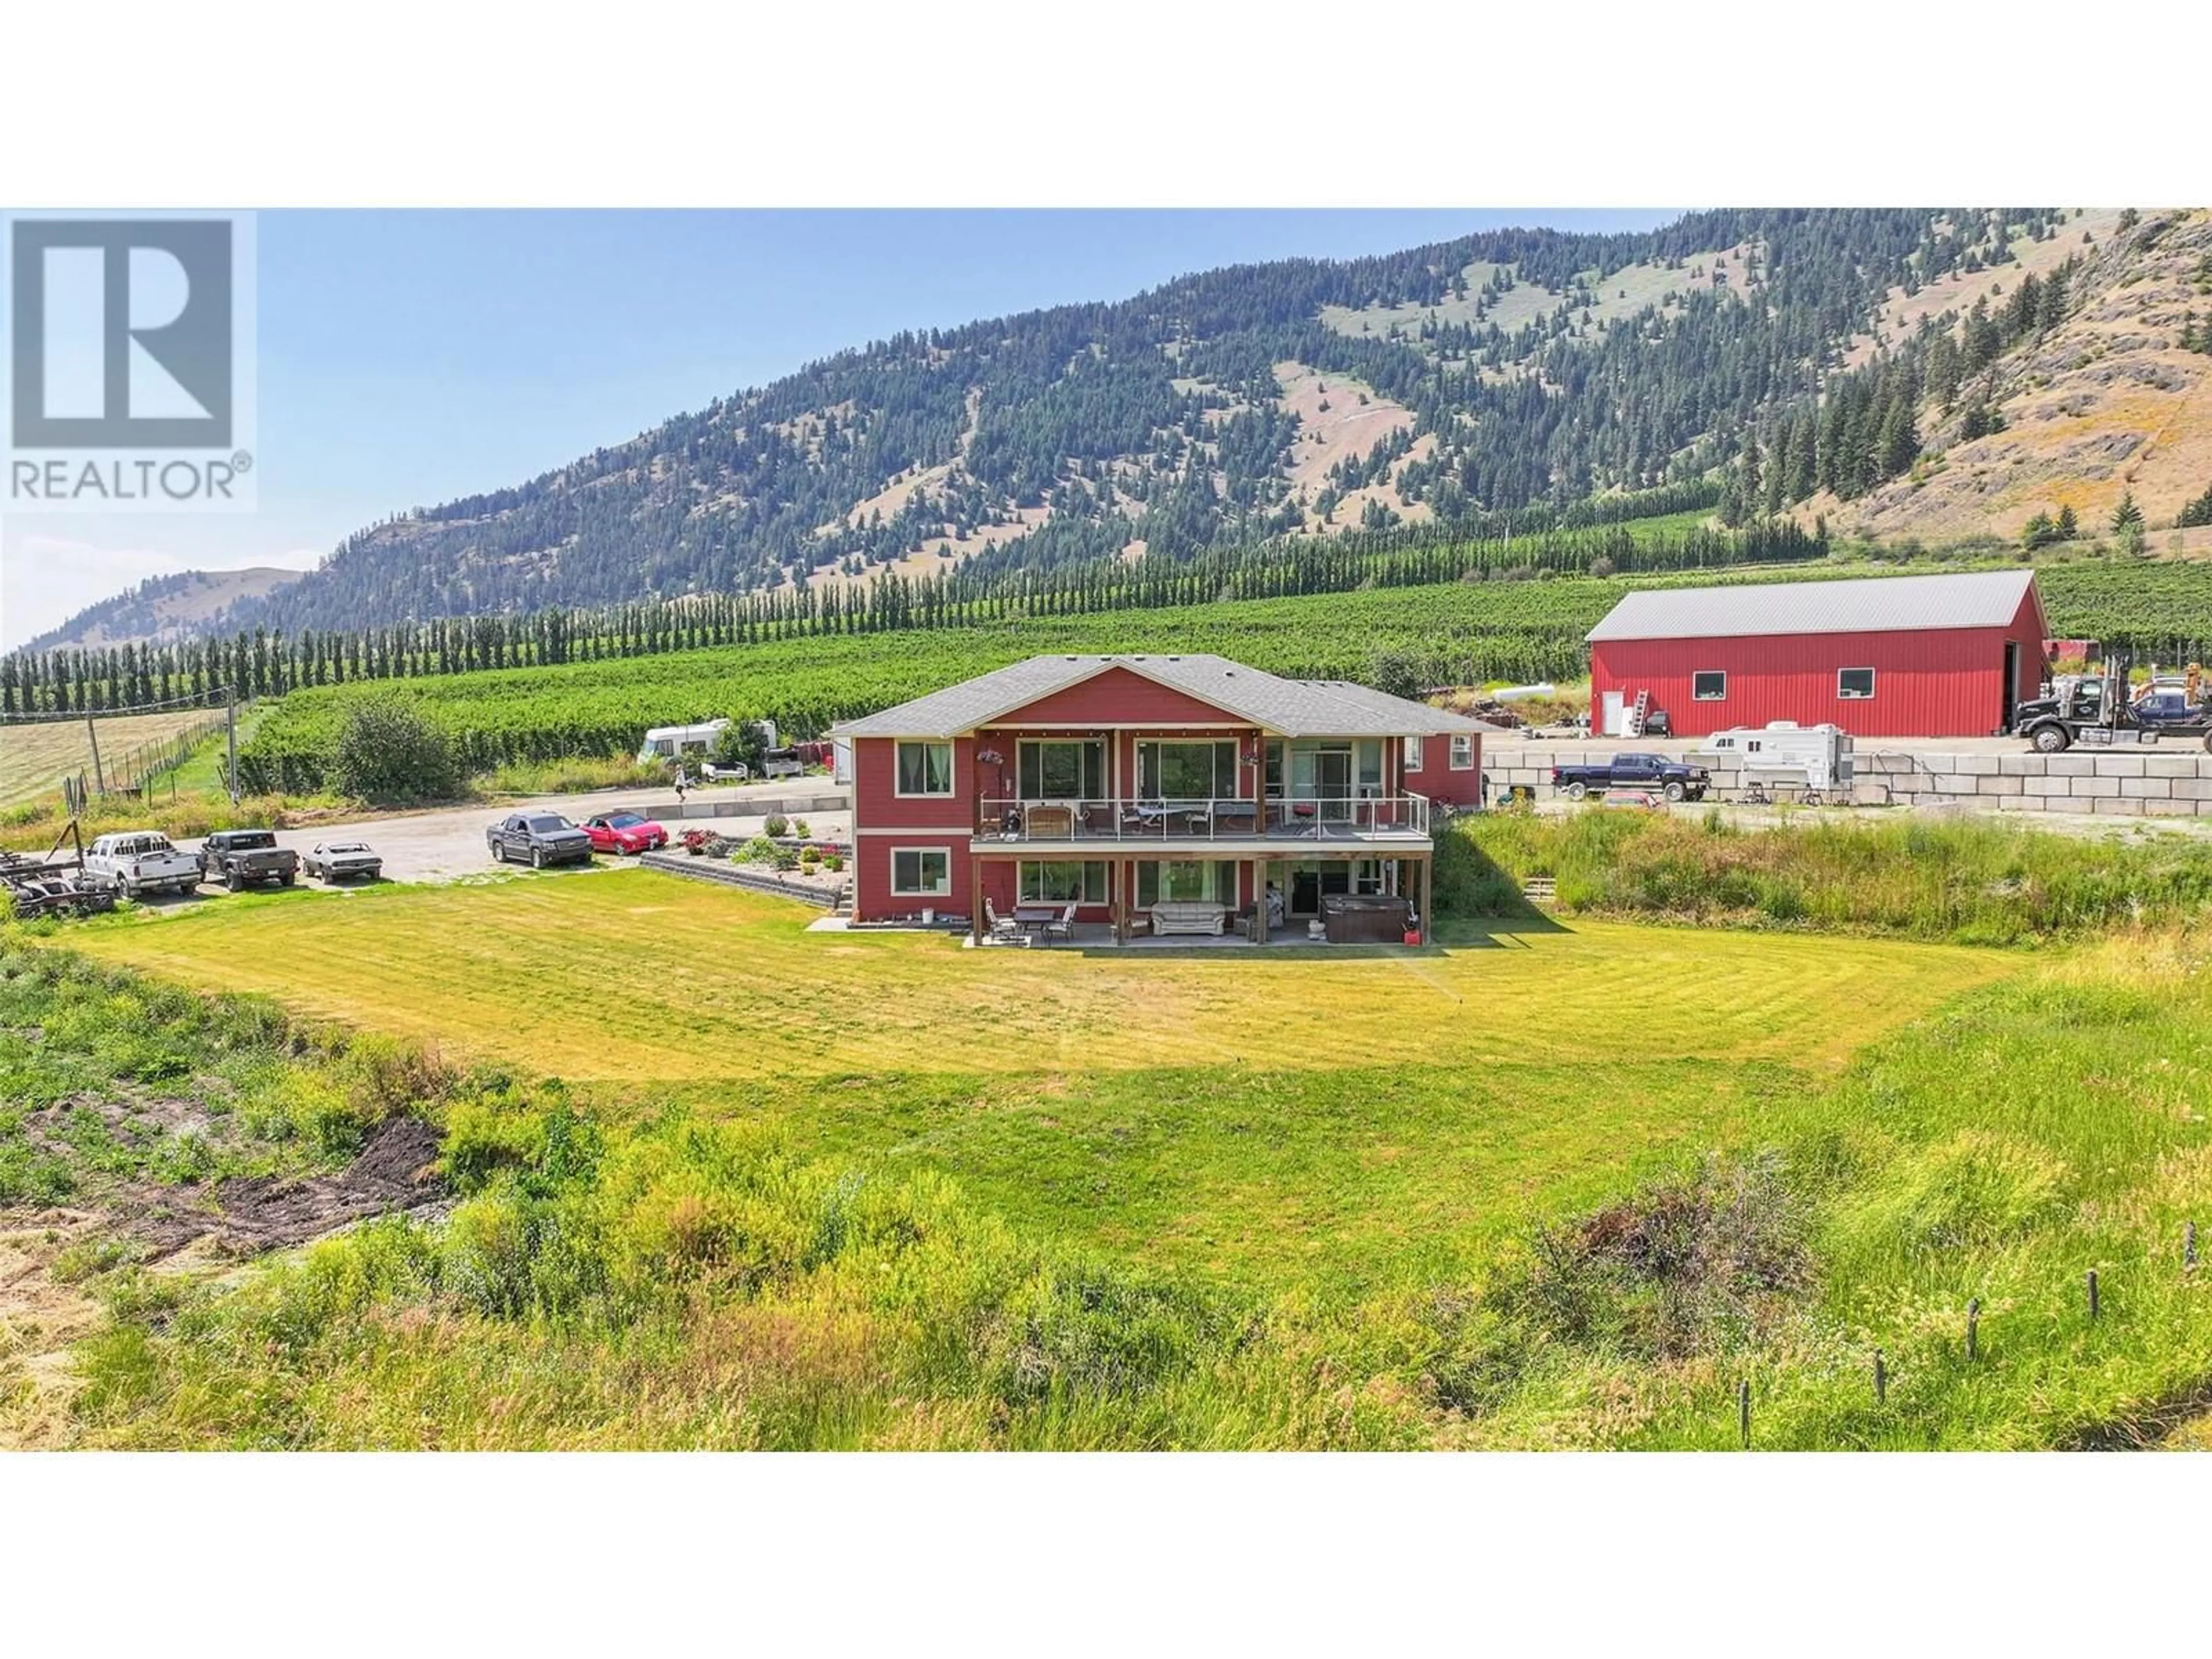 Lakeview for 6205 6 Highway, Coldstream British Columbia V1B3C7